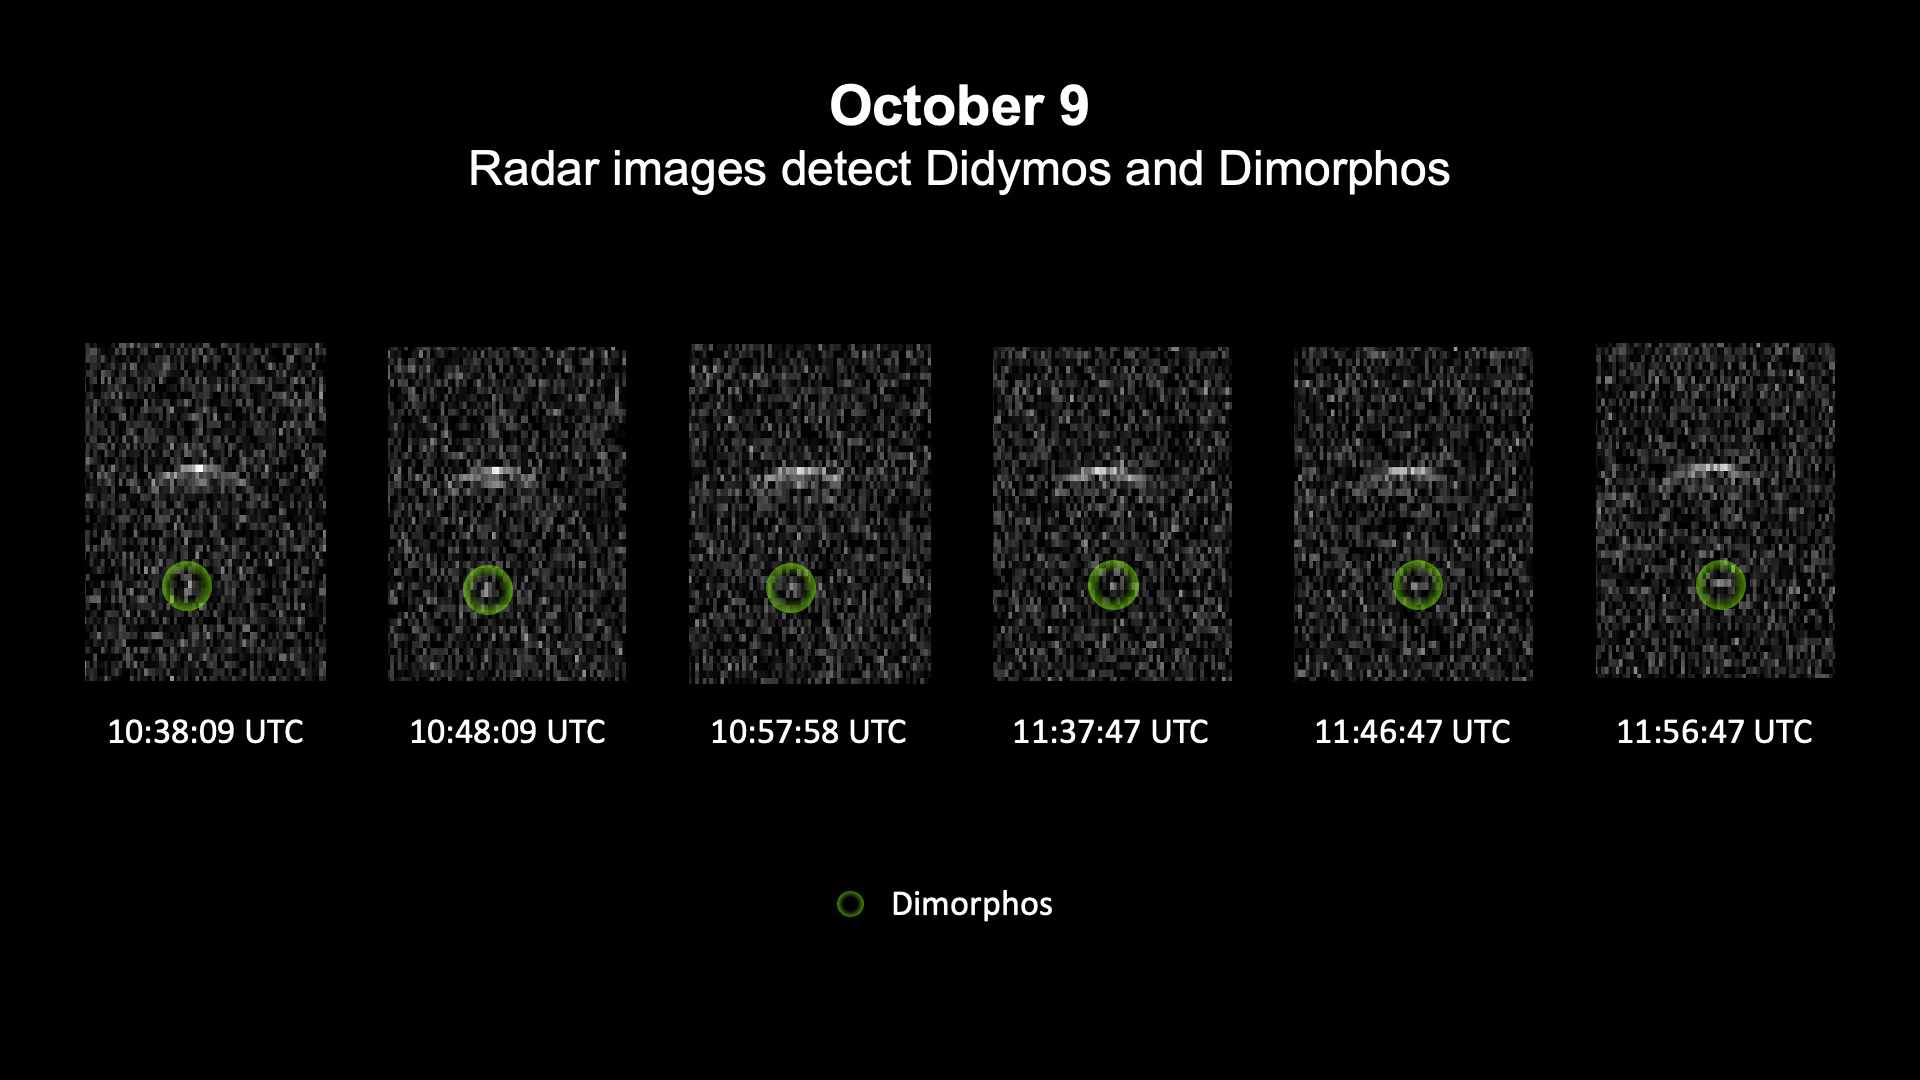 The images show a series of radar images captured at different times on Oct. 9, 2022, of the Didymos and Dimorphos binary asteroid system